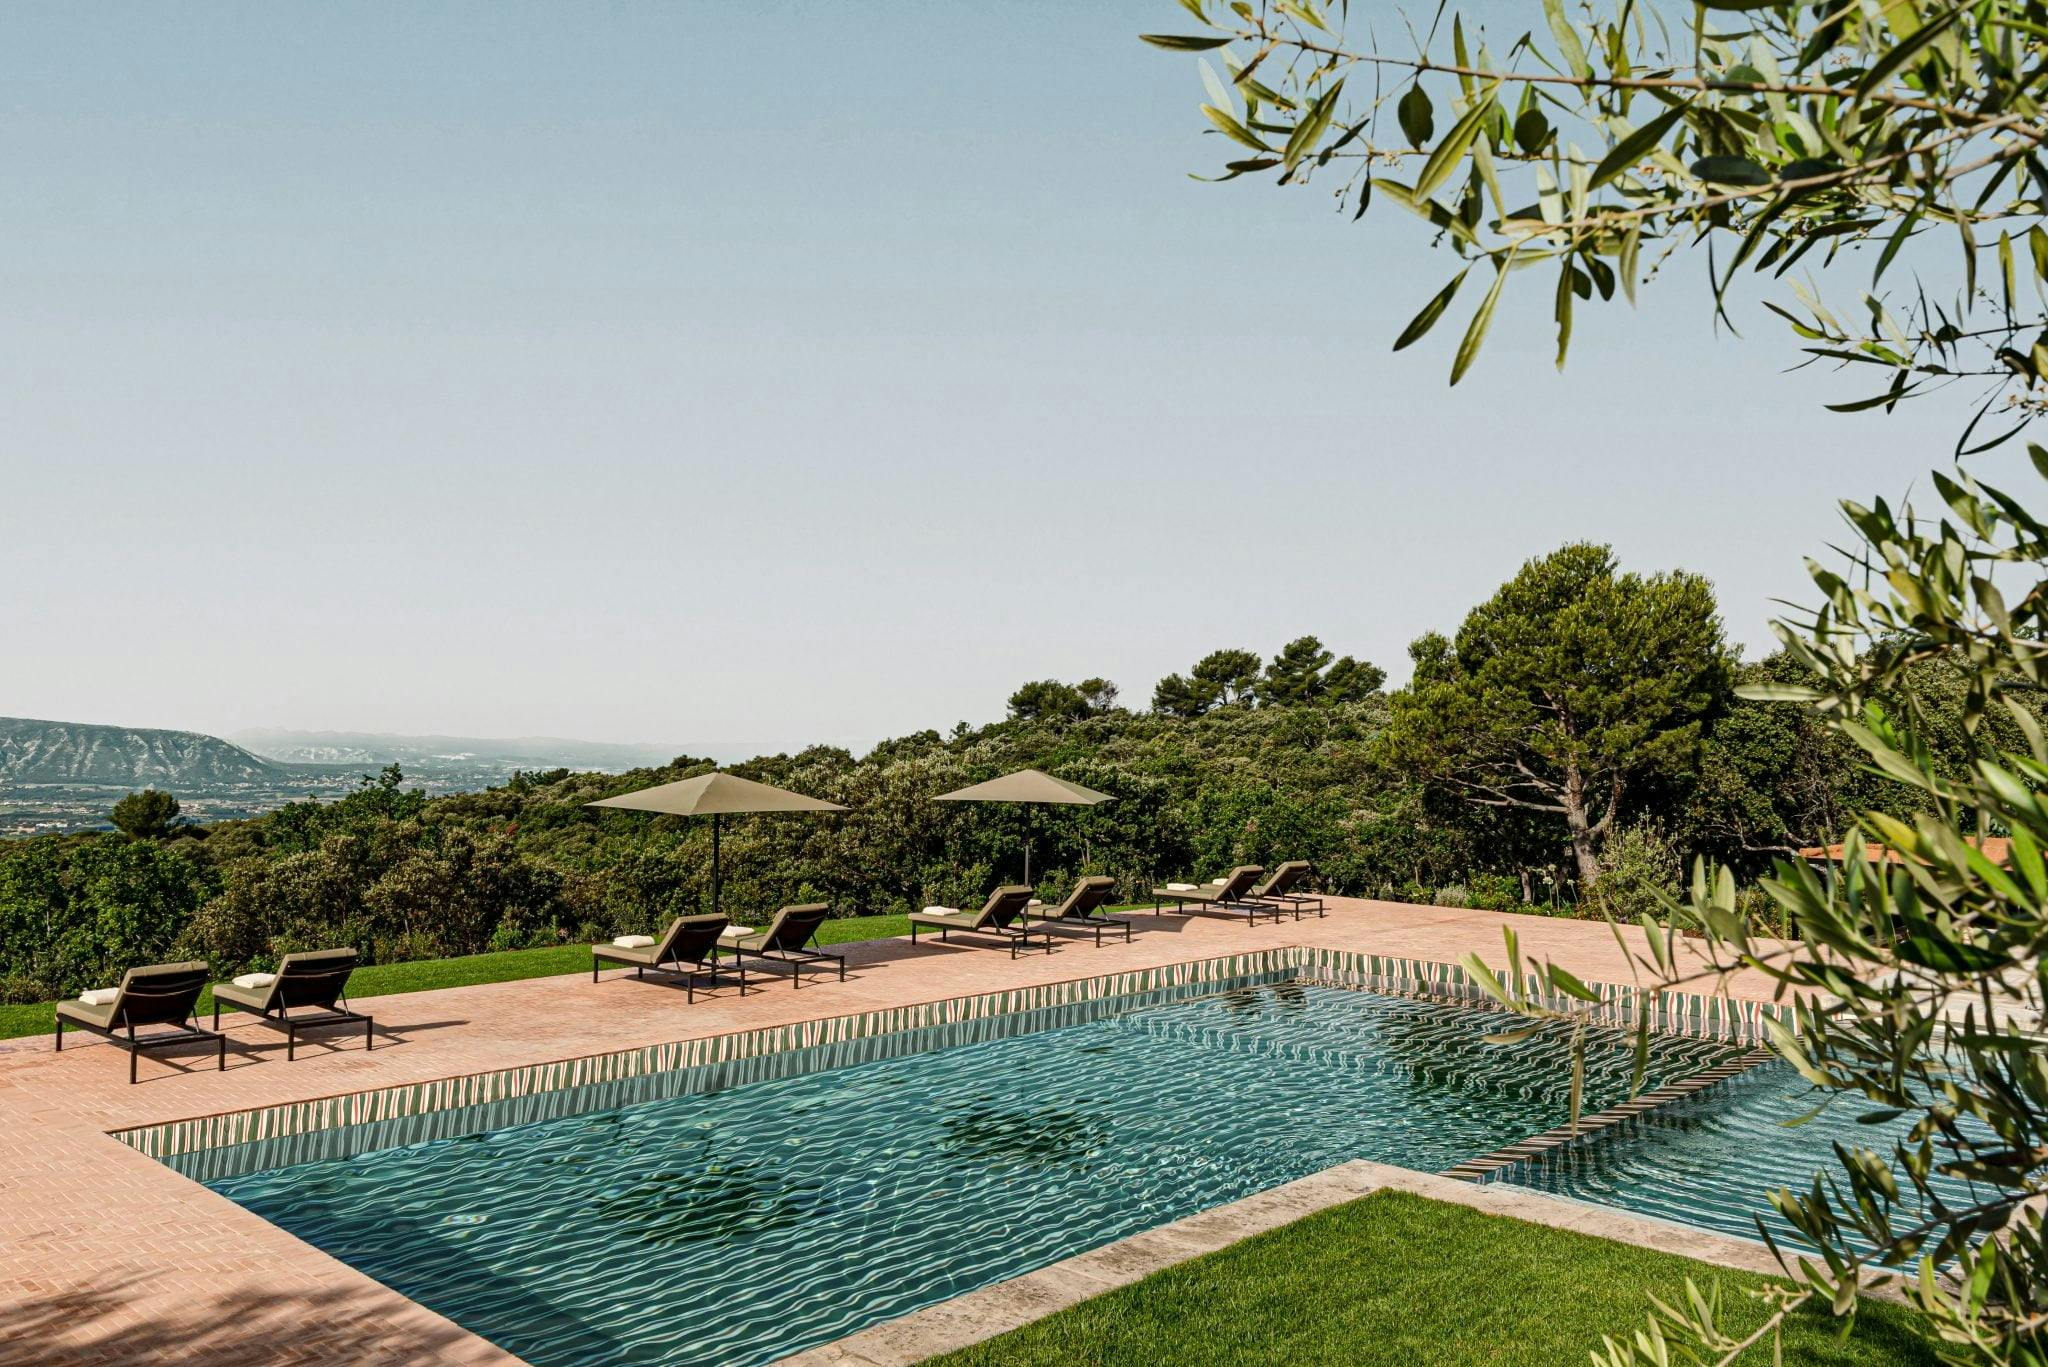 The pool and the 100% unobstructed view, sky view, deckchairs arranged to enhance the view at Hauts de Gordes.